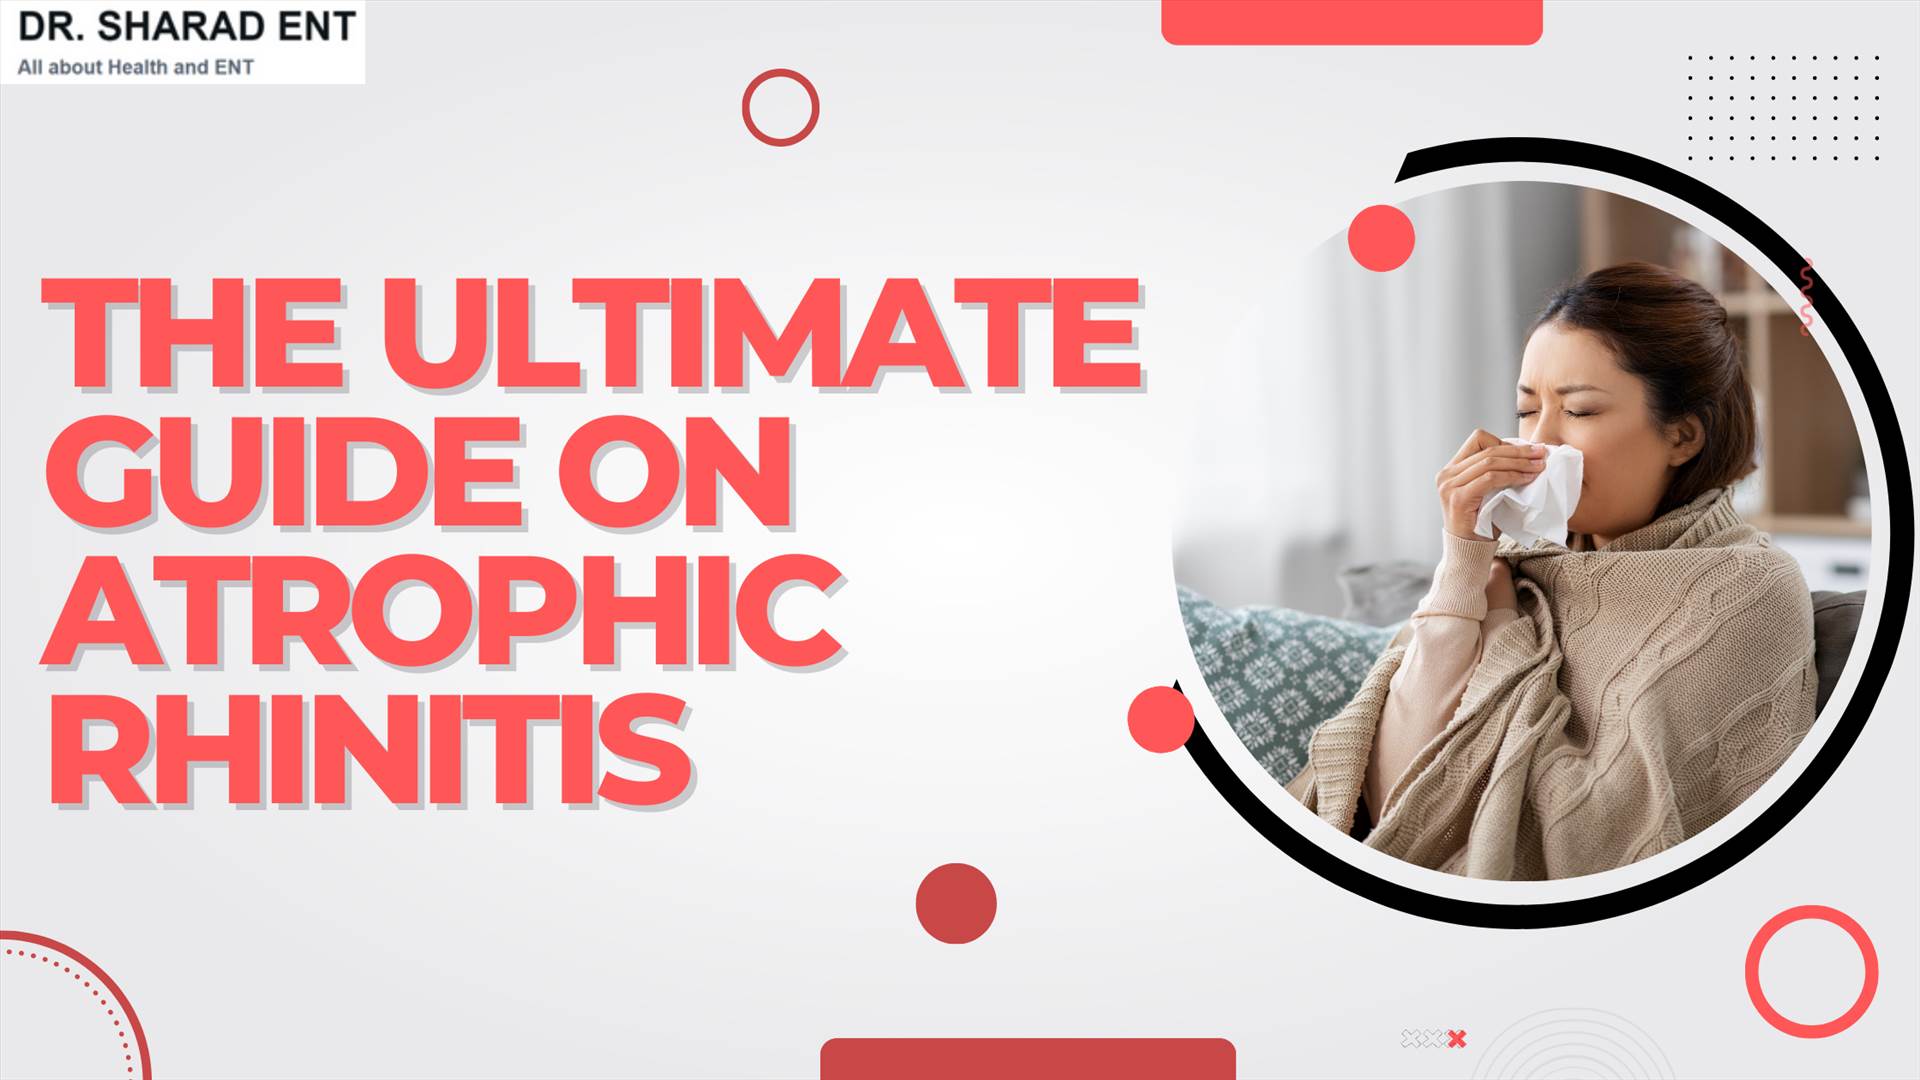 The Ultimate Guide on ATROPHIC RHINITIS.png Explore the comprehensive and informative Ultimate Guide on Atrophic Rhinitis, including valuable insights on causes, symptoms, and effective atrophic rhinitis treatment options. Take charge of your health and find the best treatment for your condition no by Dr Sharad